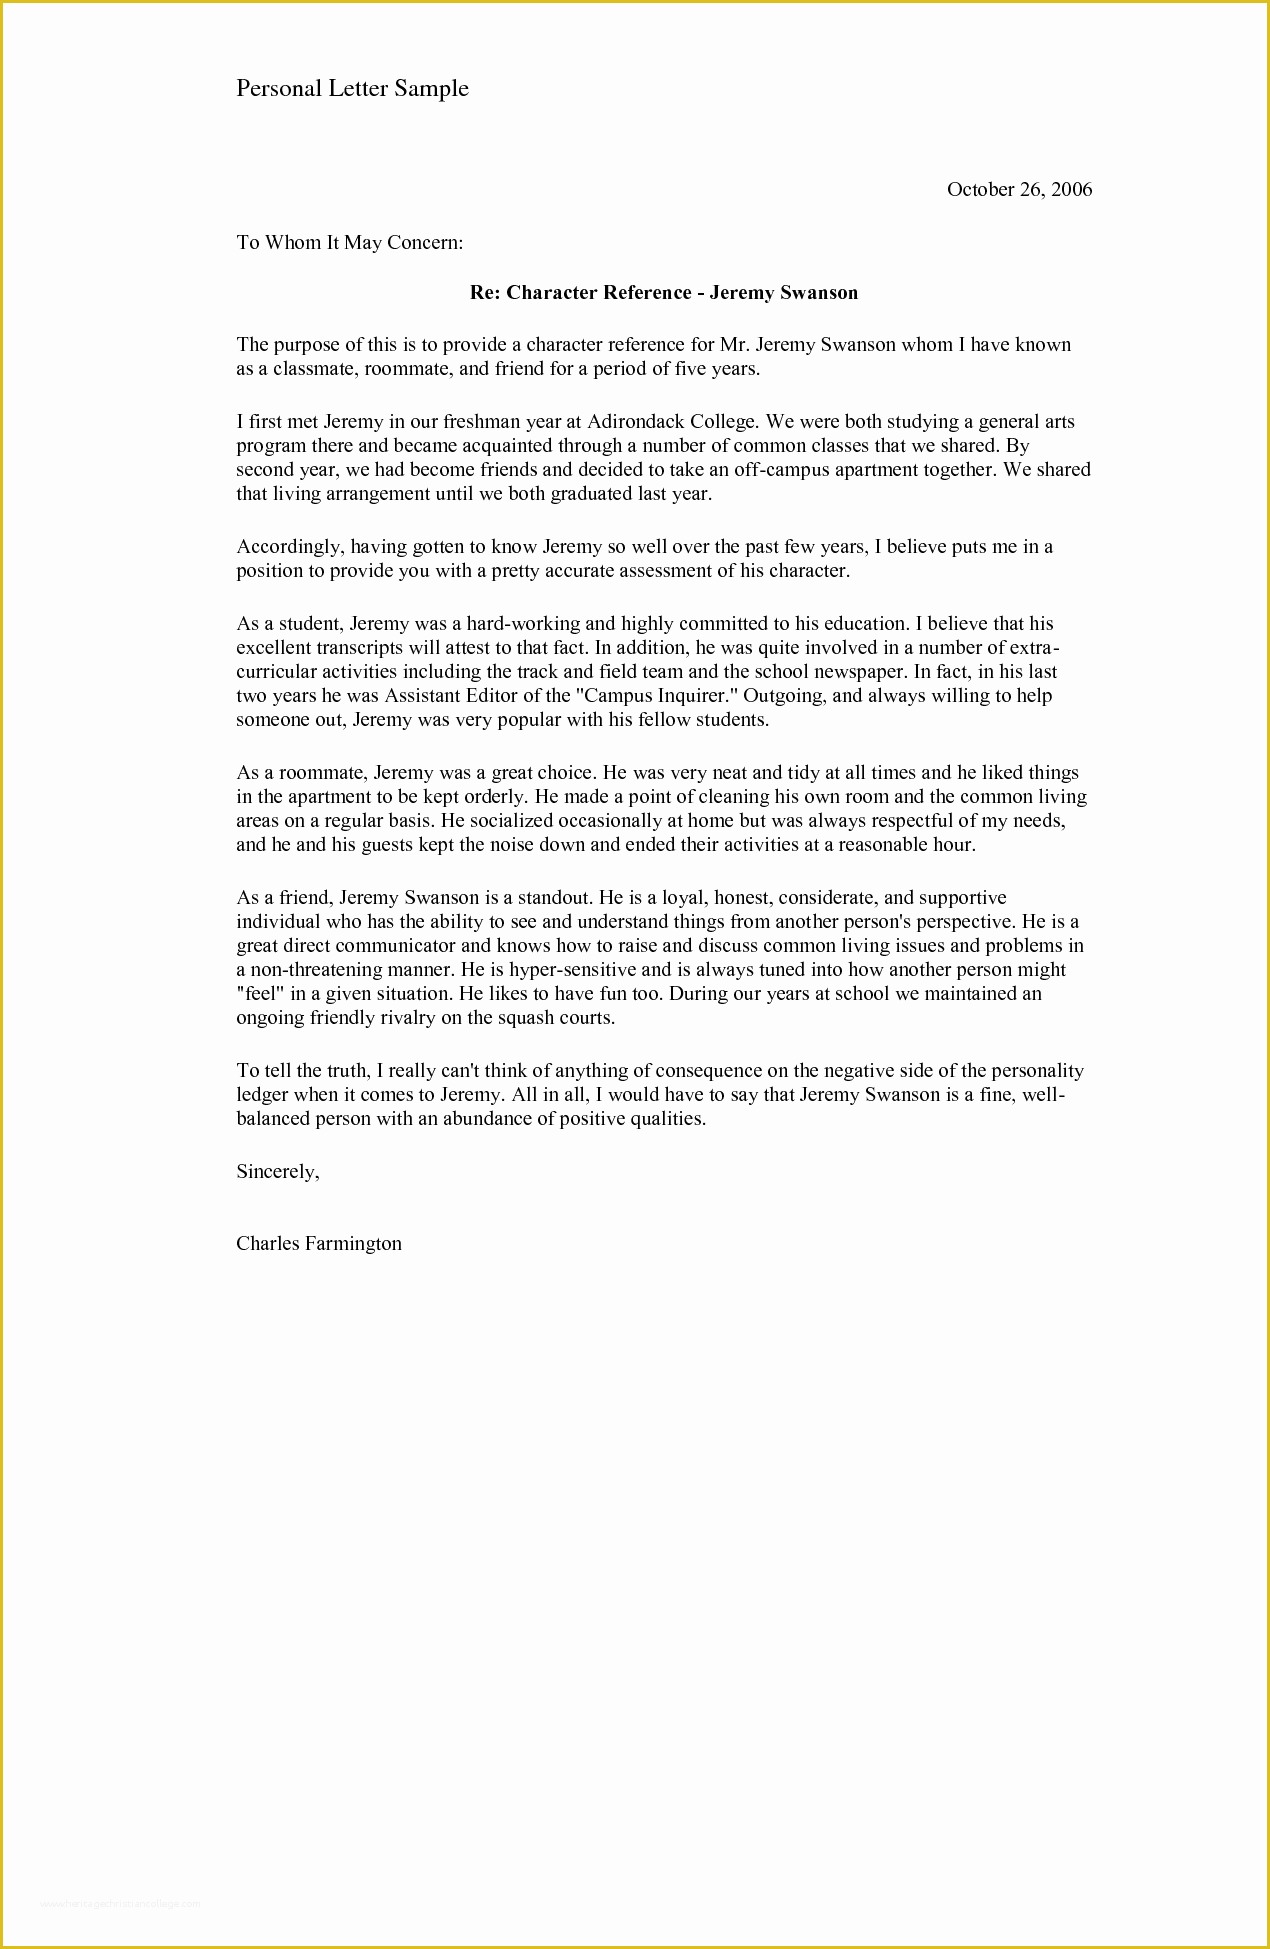 Personal Reference Letter Template Free Of Sample Personal Character Reference for A Friend